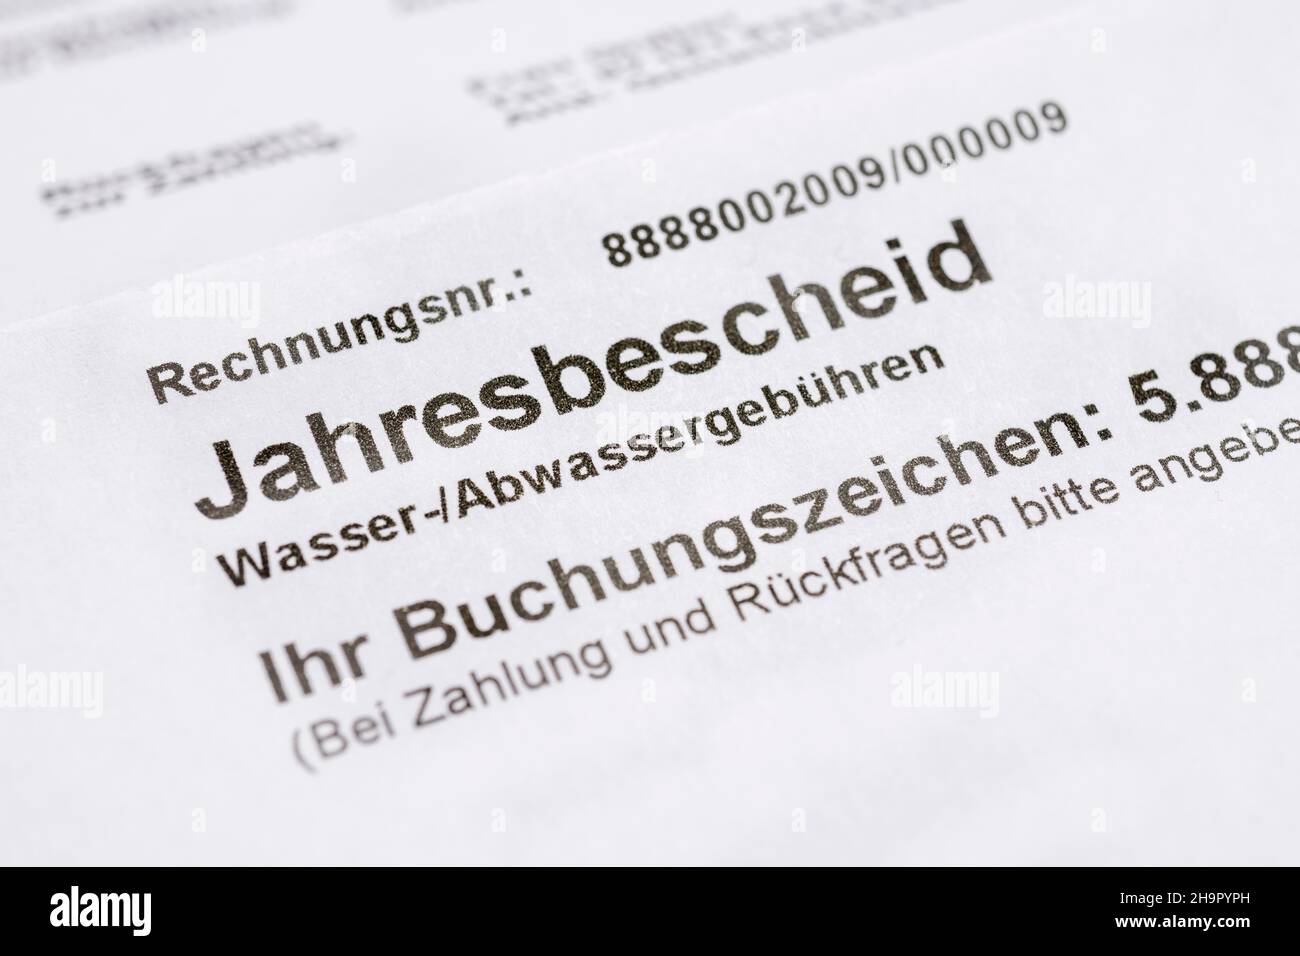 Annual notice, billing, water/wastewater charges, Germany Stock Photo